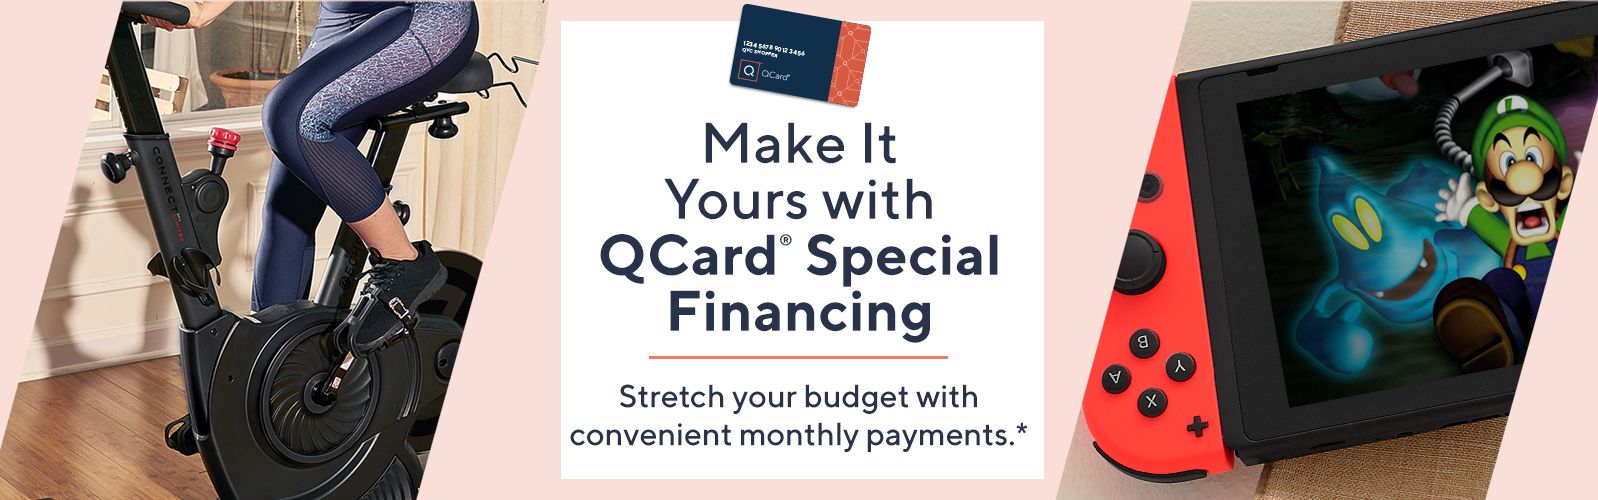 Make It Yours with QCard® Special Financing Stretch your budget with convenient monthly payments.*